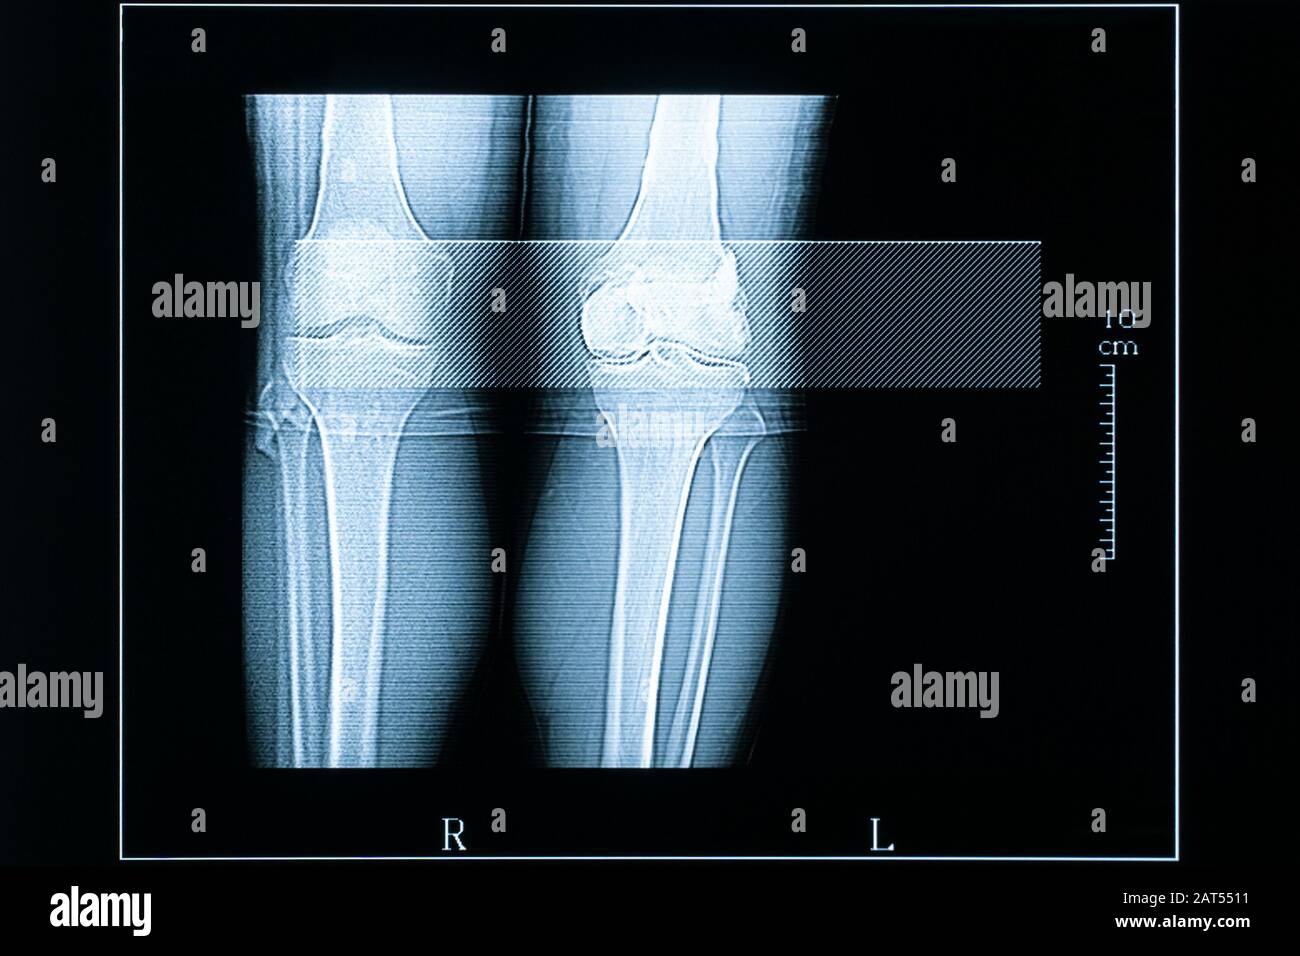 Young Male (25 years old) left and right knees CT scan. Medical and healthcare imagery with scale in centimeters. Left knee injured. Stock Photo